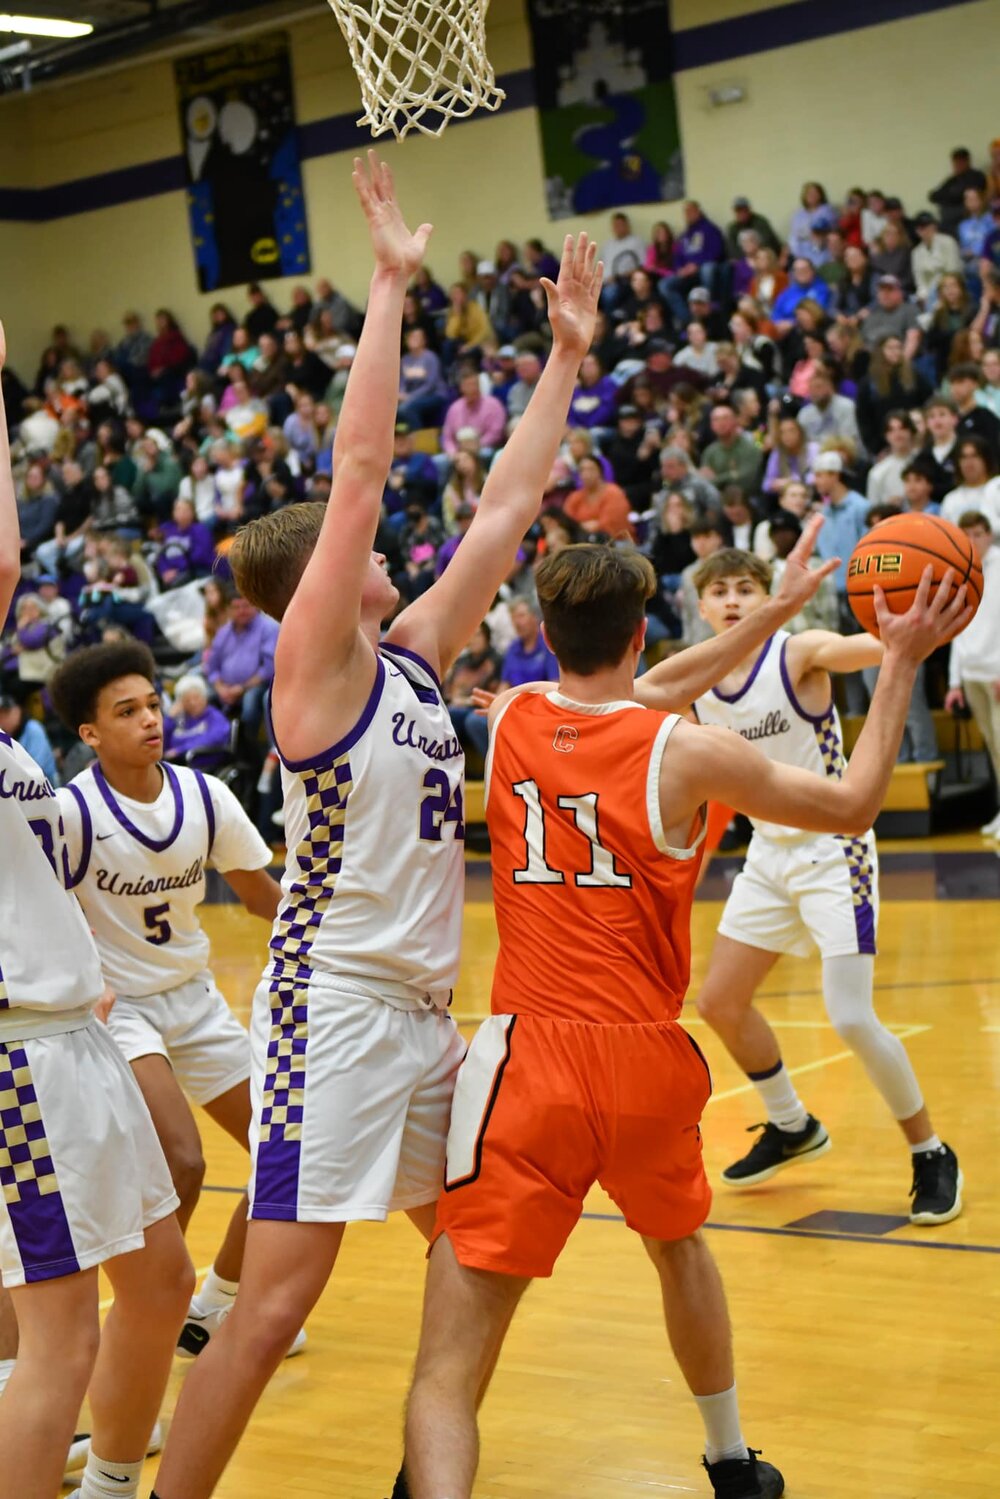 Cascade's Zach Crosslin (11 orange) looks for a pass against Community's Austin Stickler (24 white). Stickler had 15 points for the Vikings while Crosslin led the Champs with 12 points.